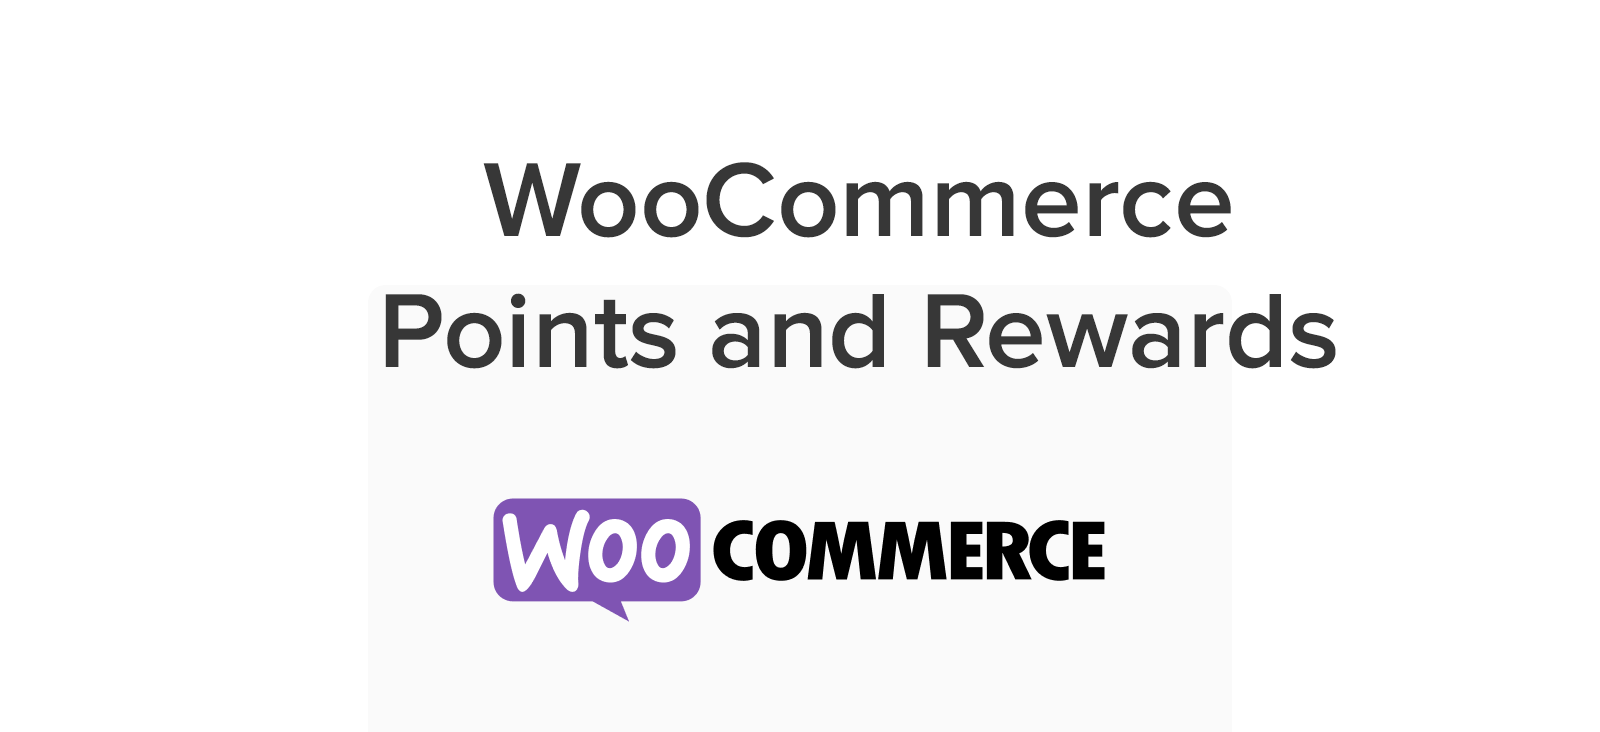 Reward your customers for purchases and other actions with points which can be redeemed for discounts with WooCommerce Points and Rewards.